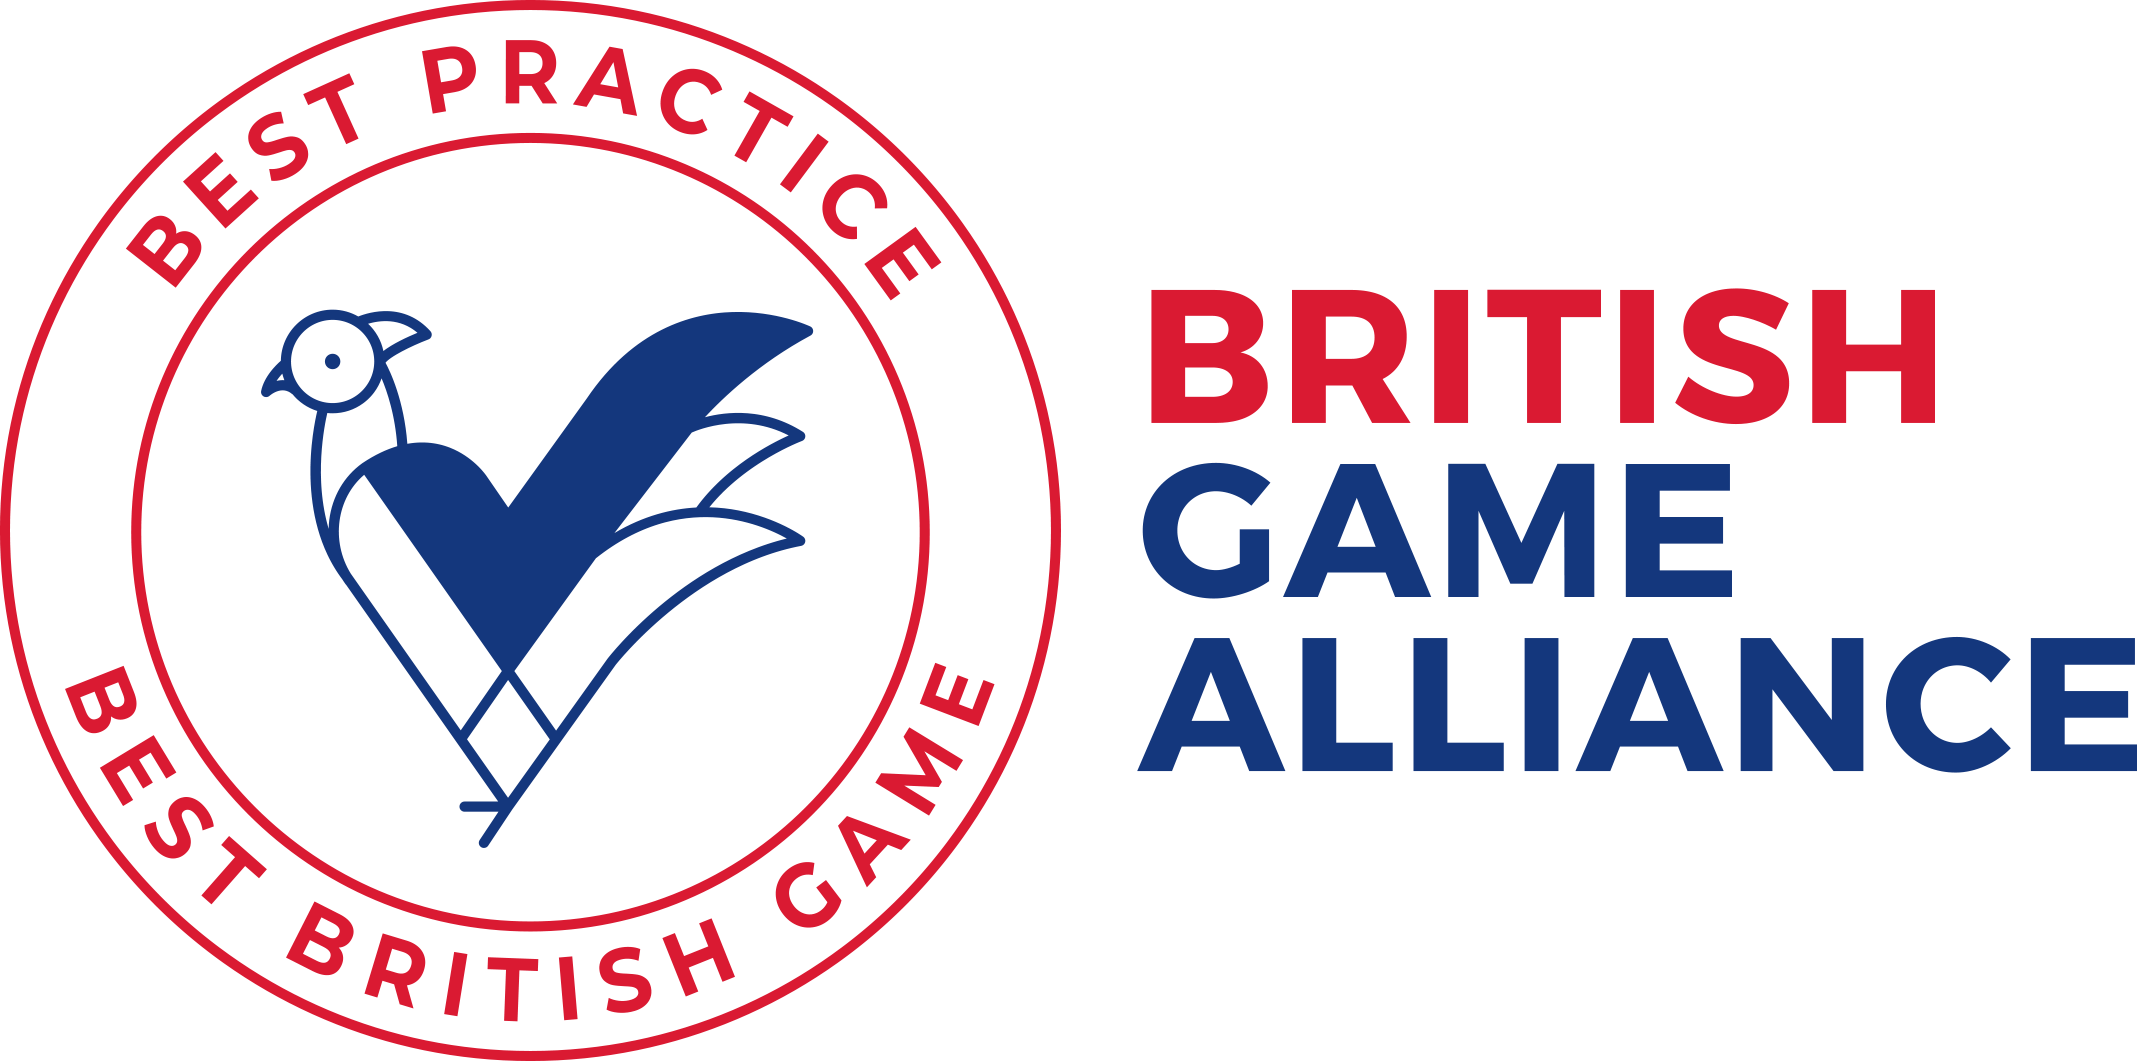 Keepers Alliance. British games